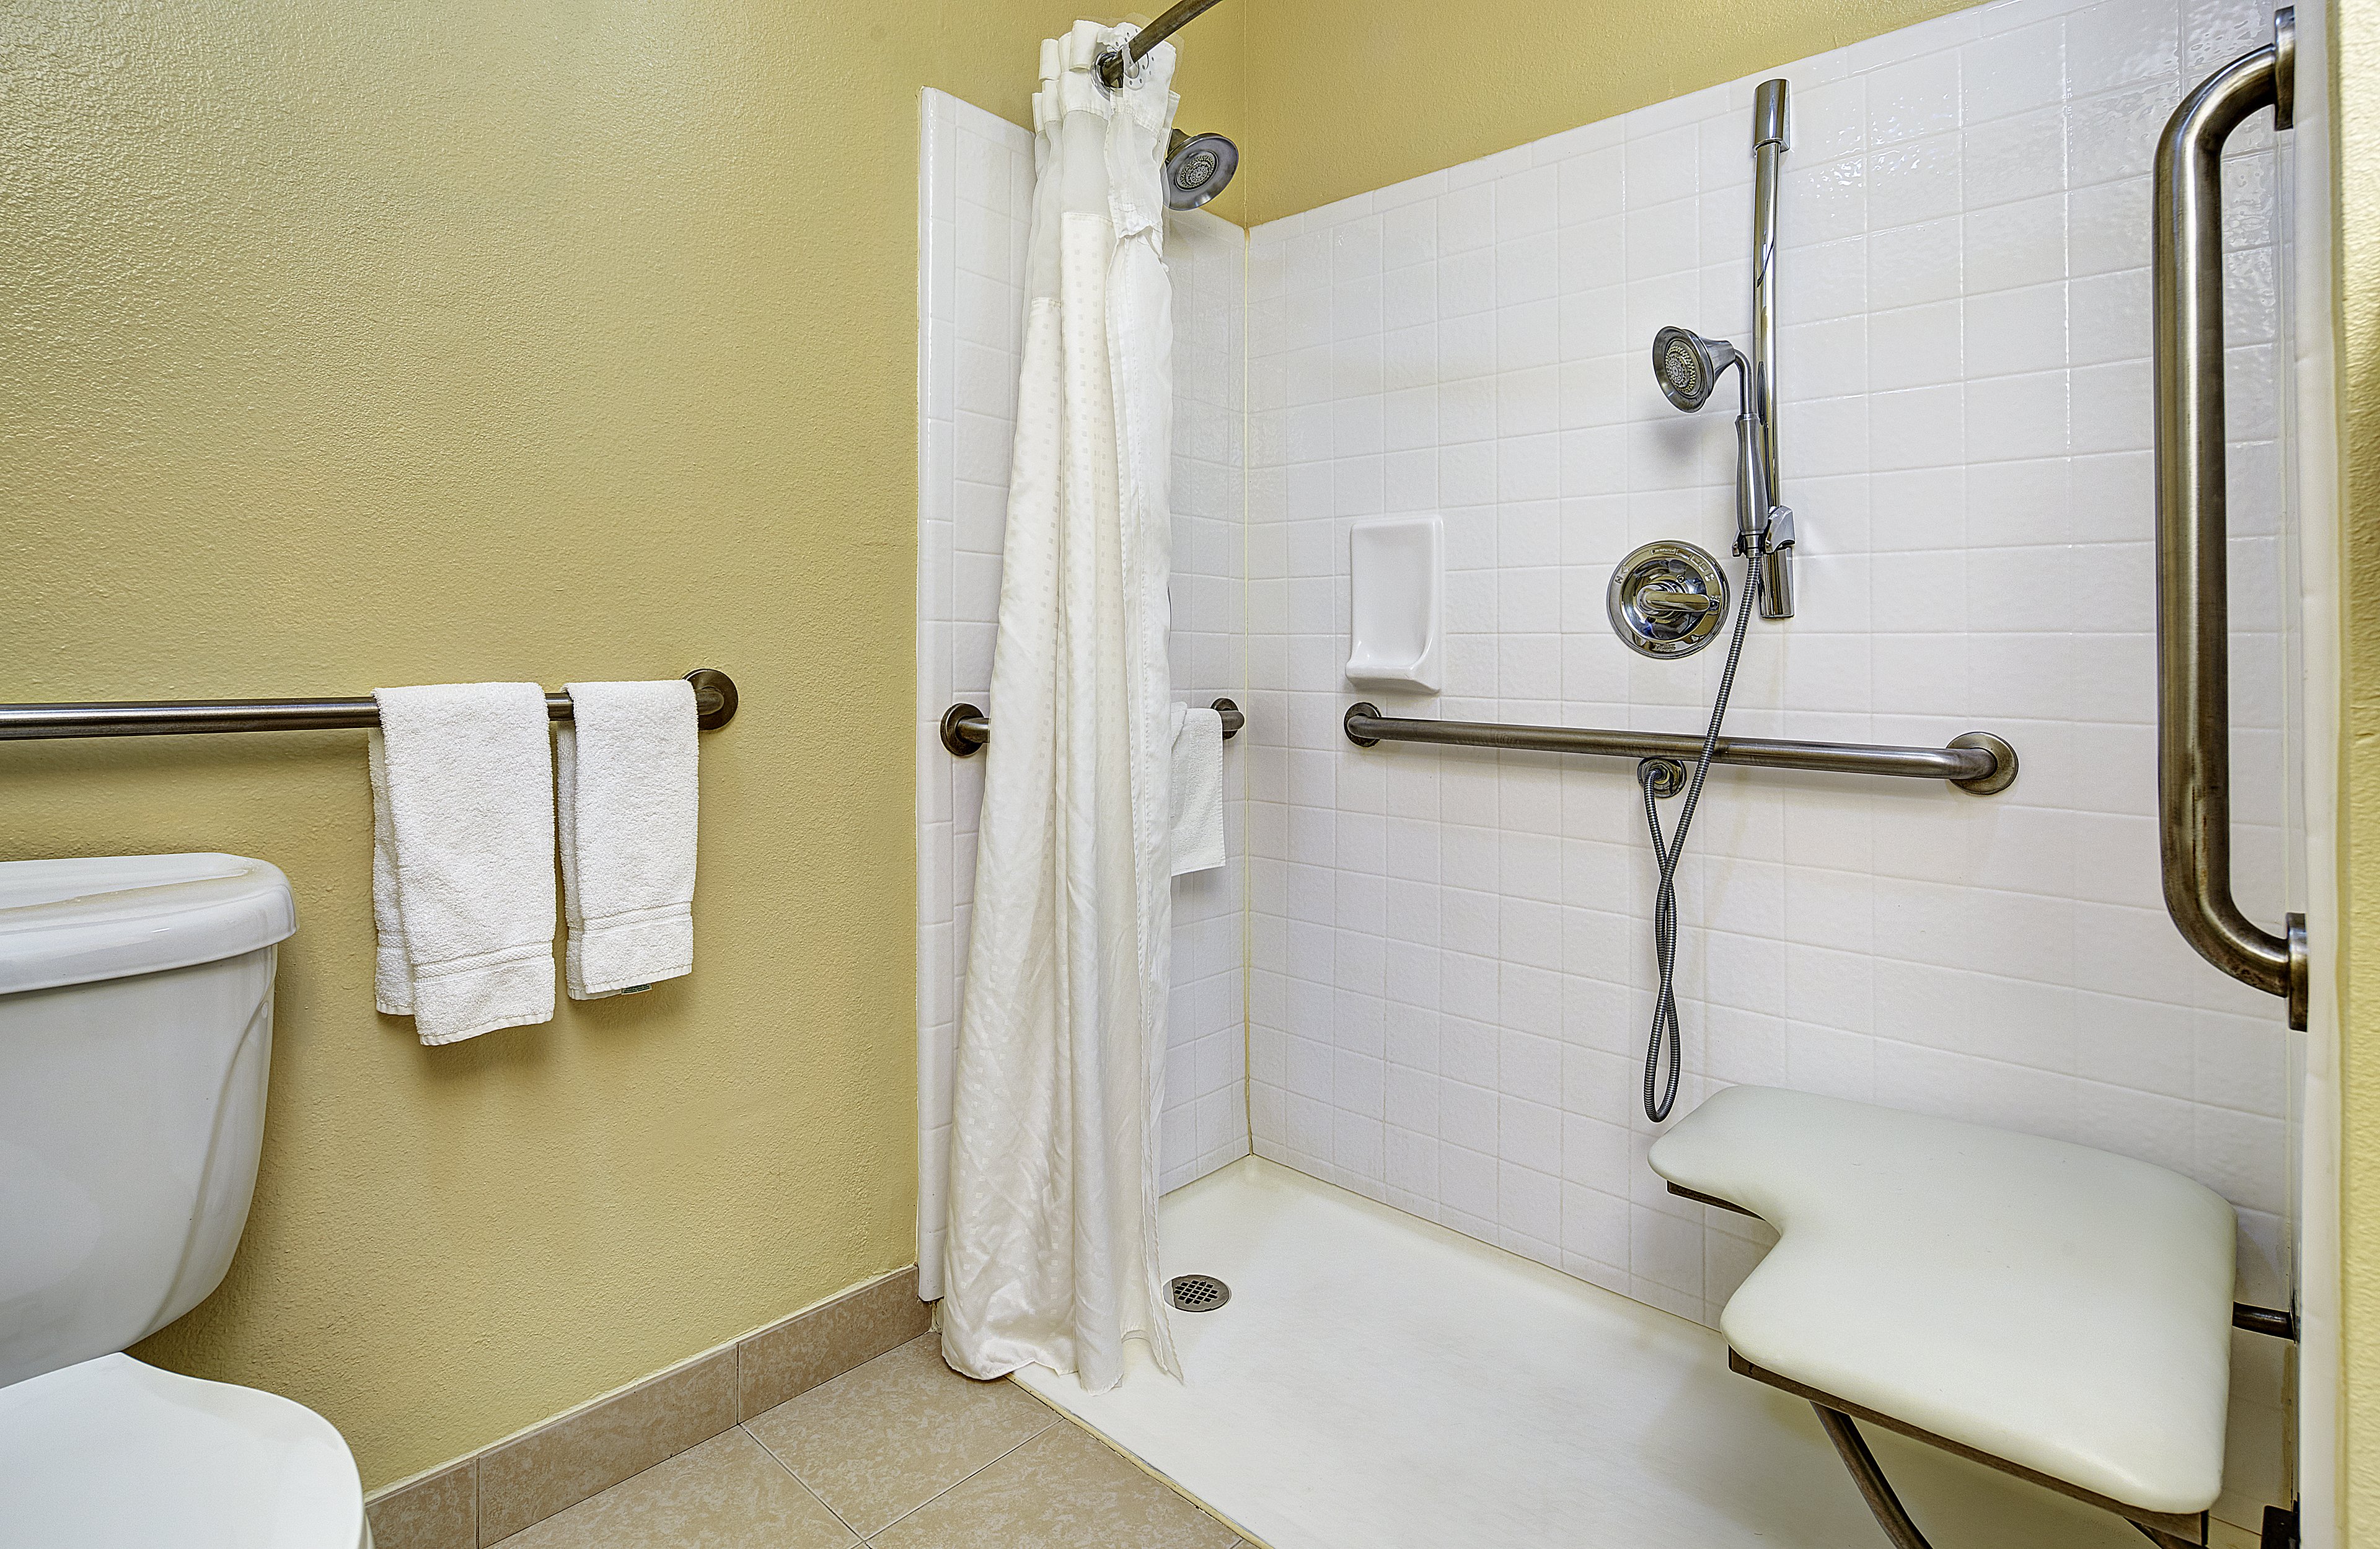 Accessible rooms with roll-in shower are available upon request.